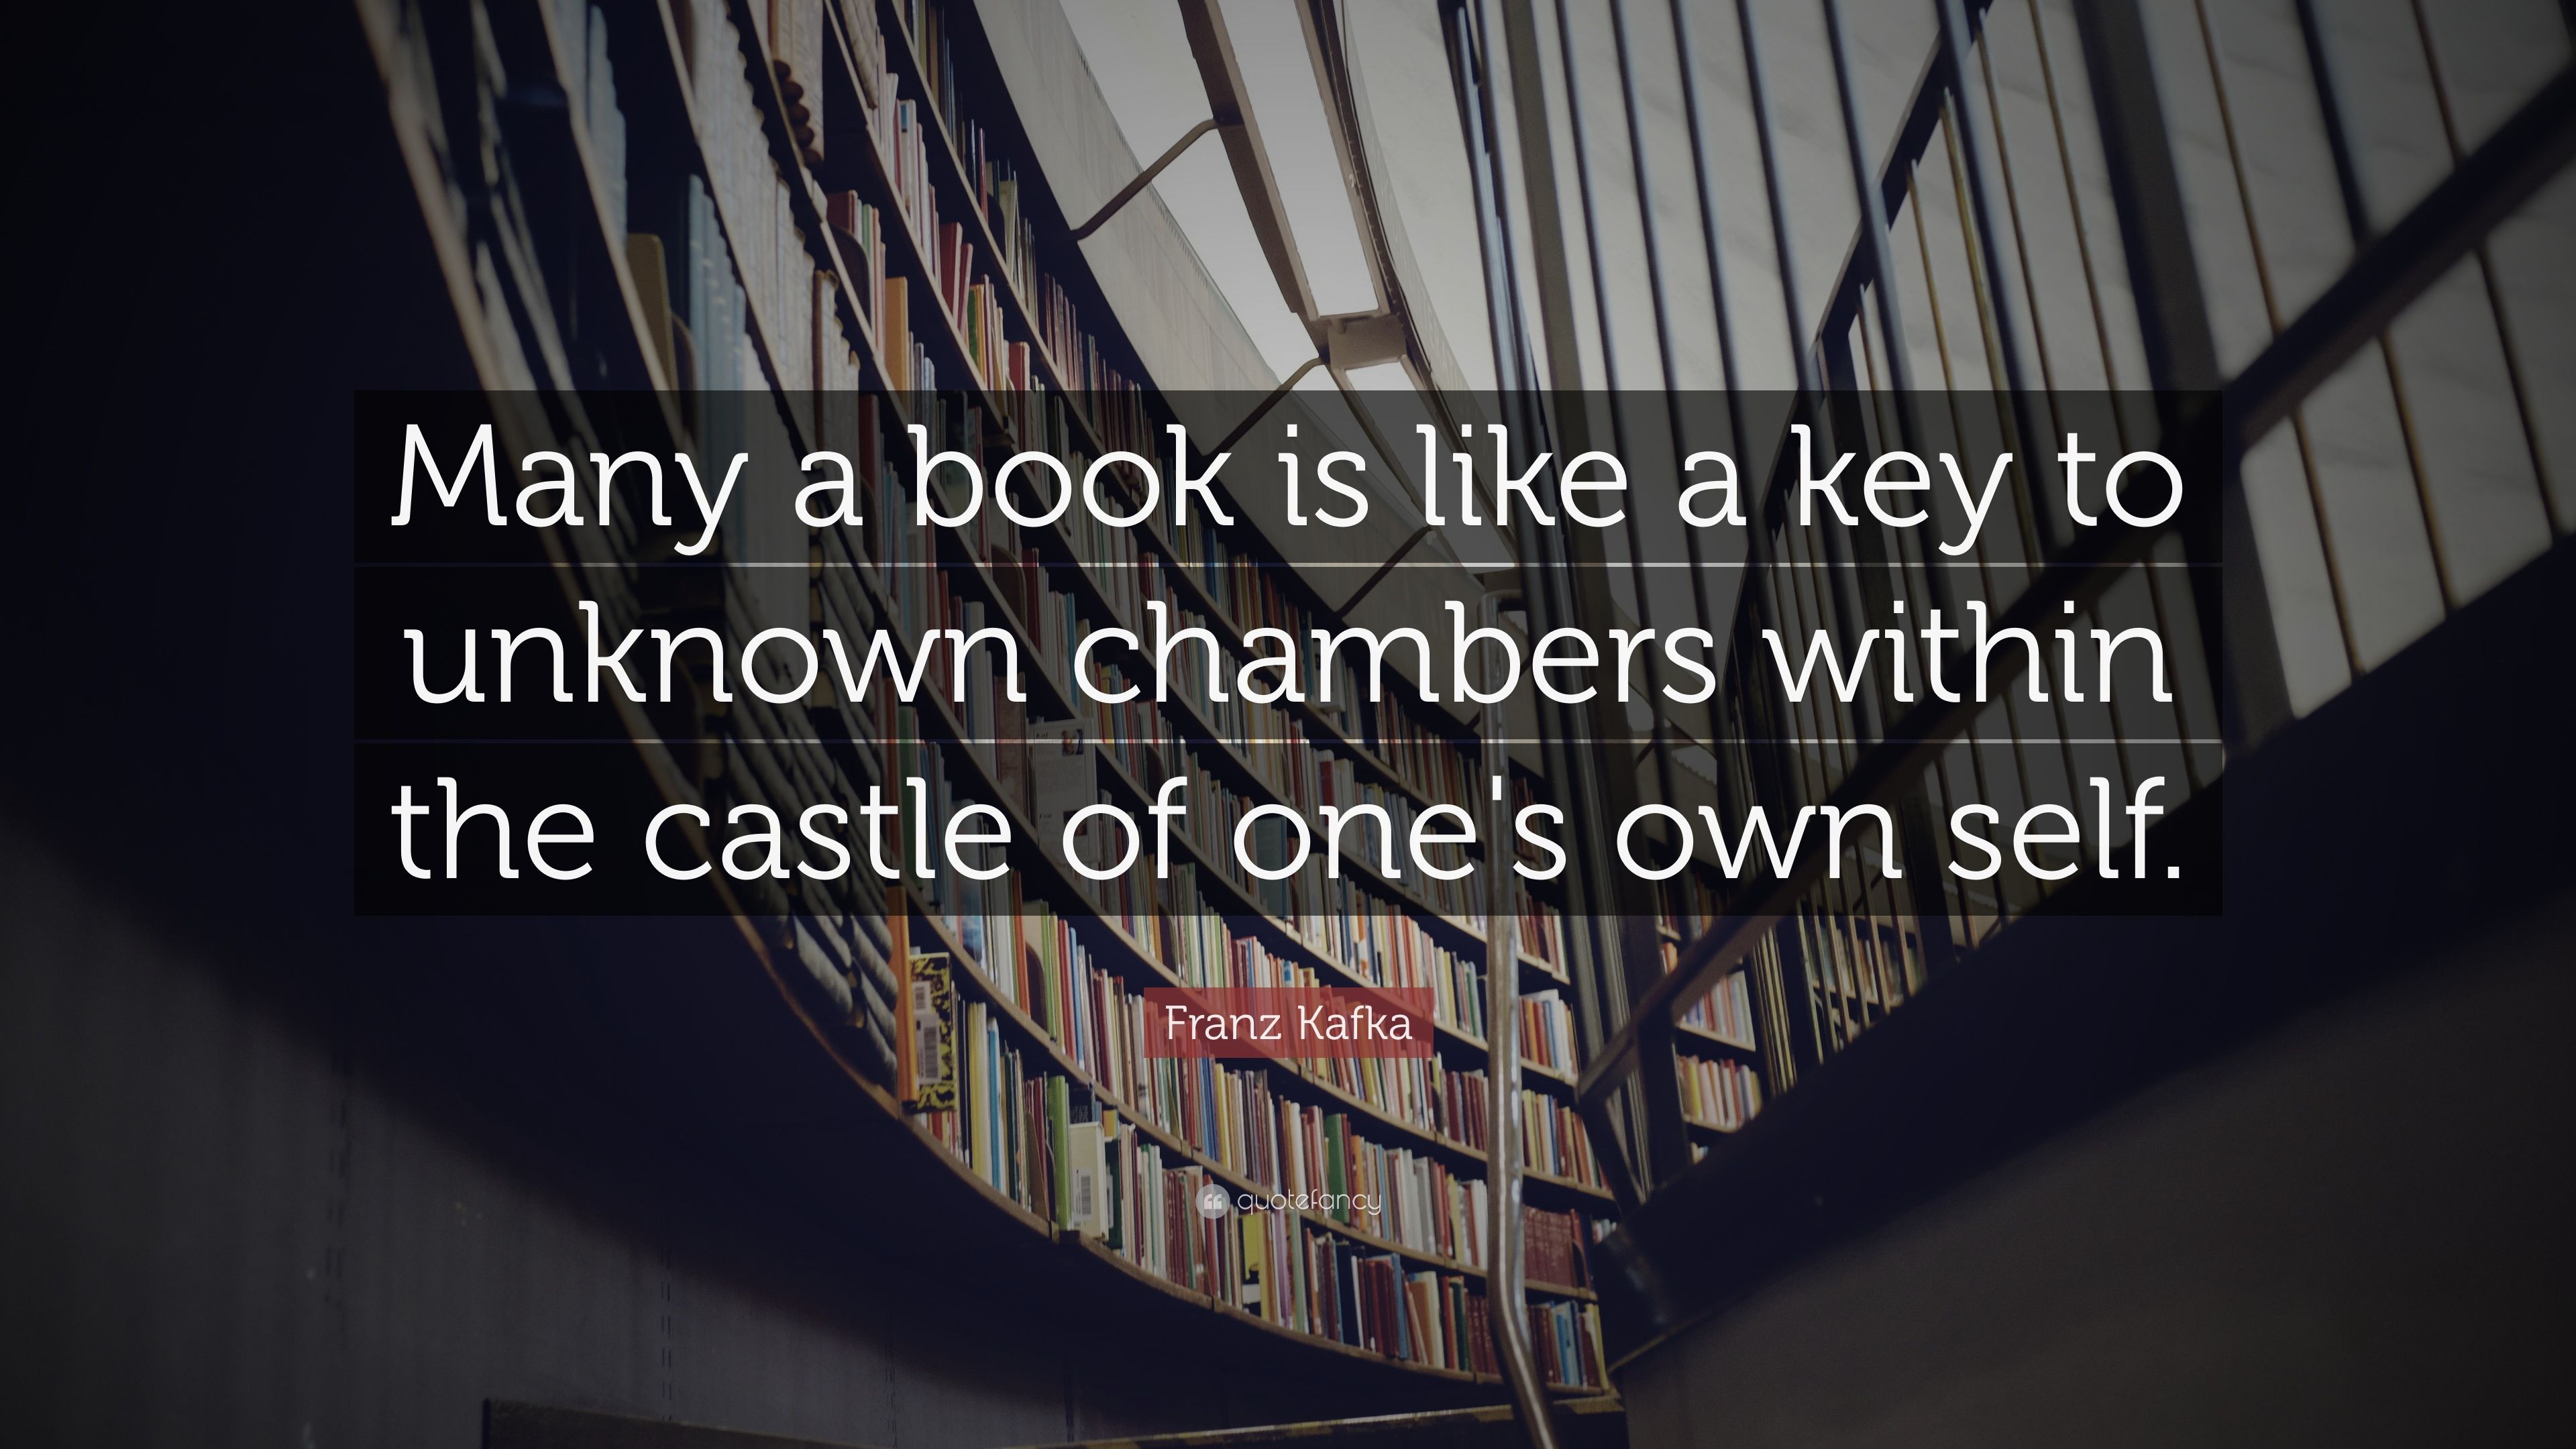 Franz Kafka Quote: "Many a book is like a key to unknown chambers 